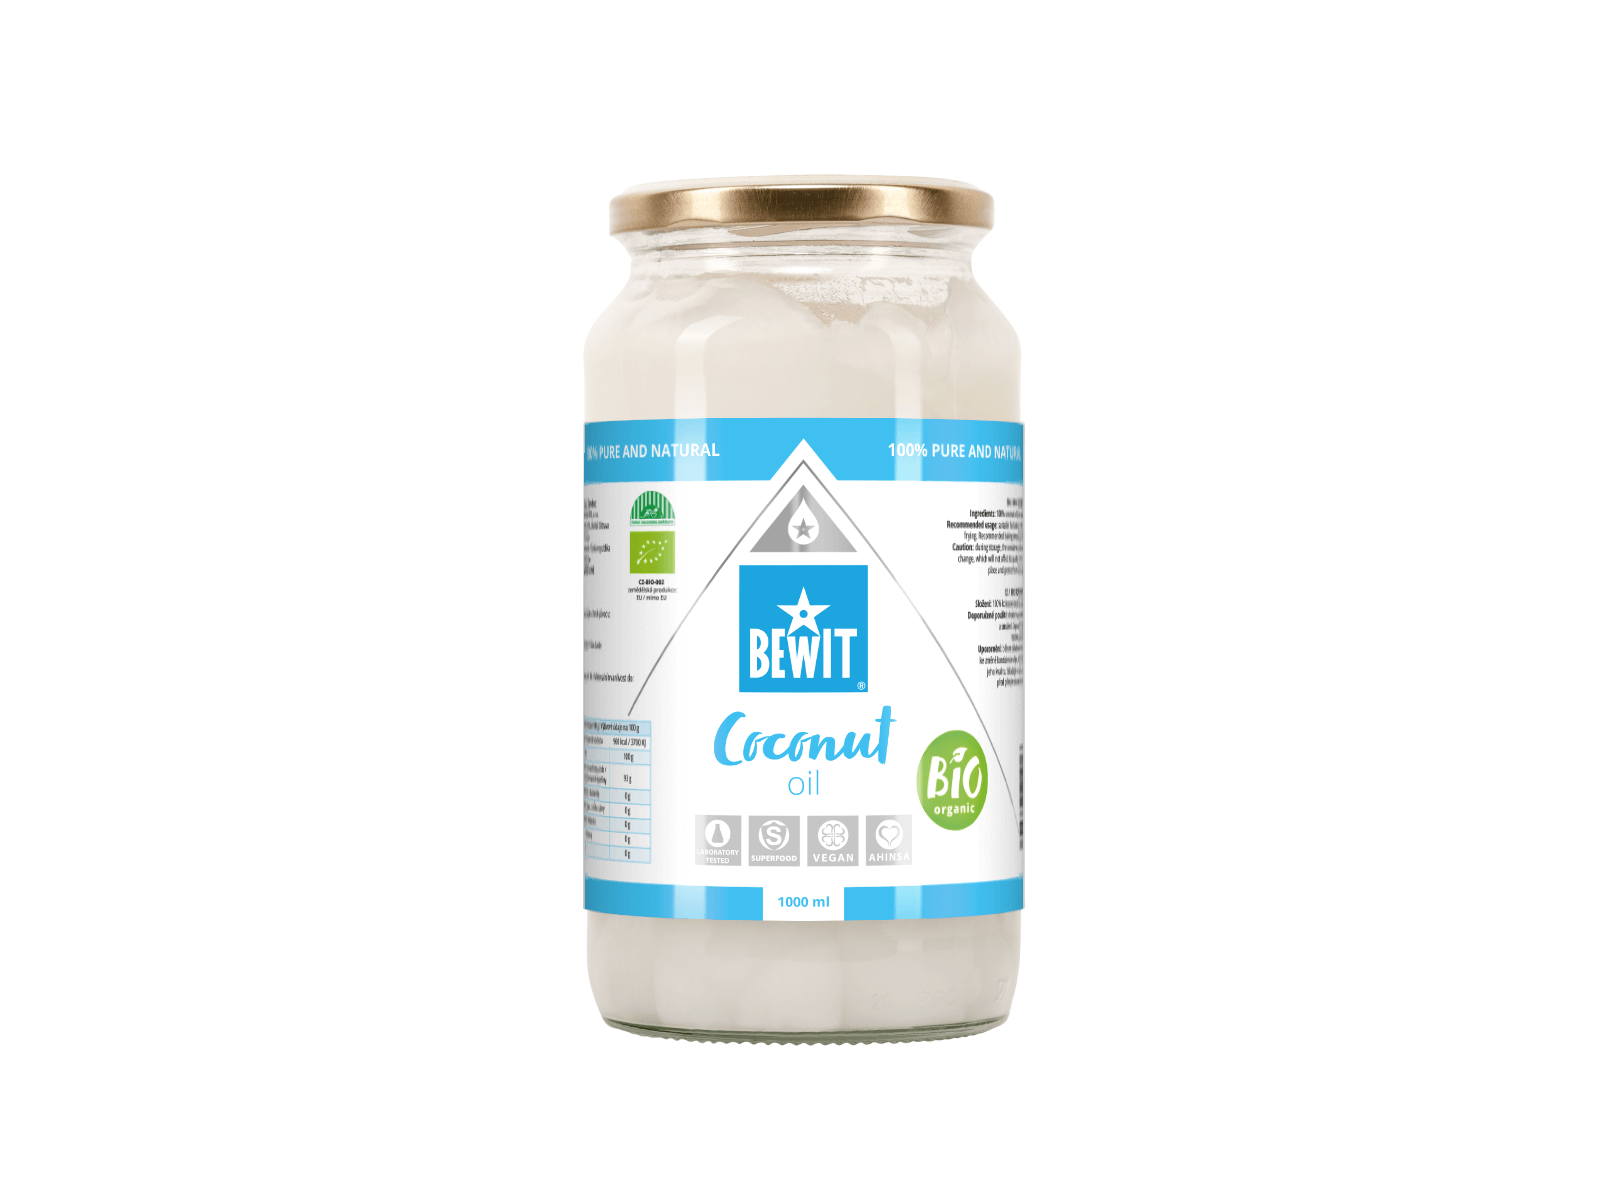 BEWIT Organic coconut oil - 100% pure and natural plant oil - 1